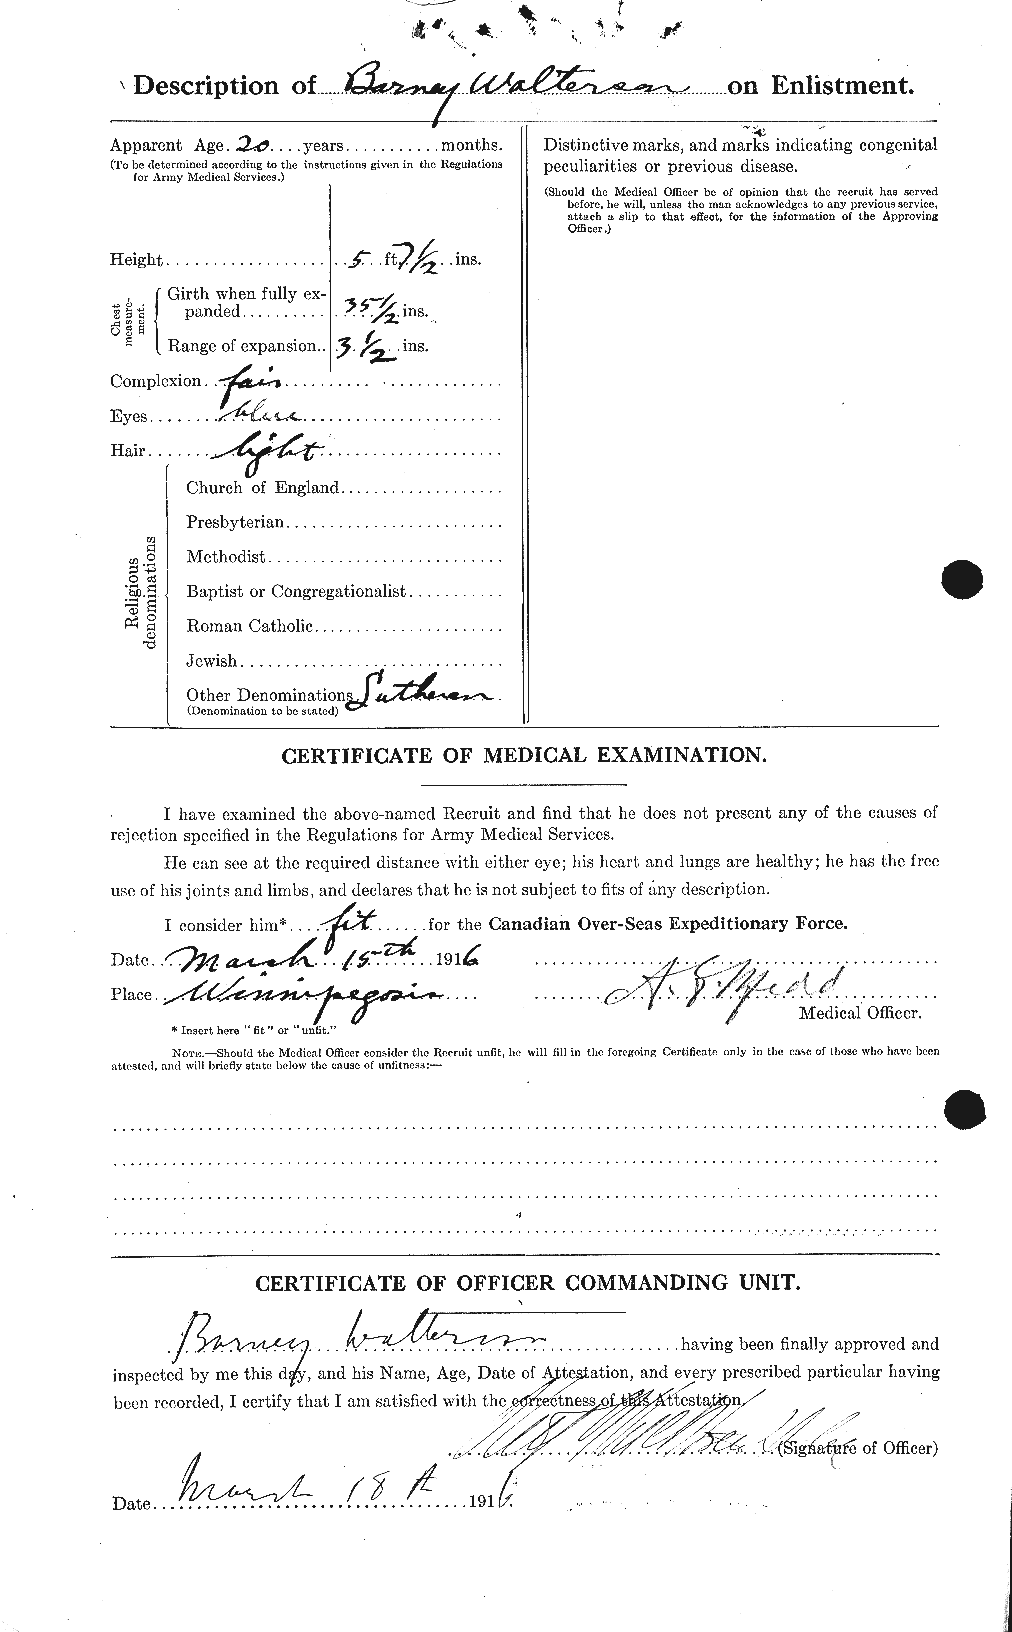 Personnel Records of the First World War - CEF 655484b